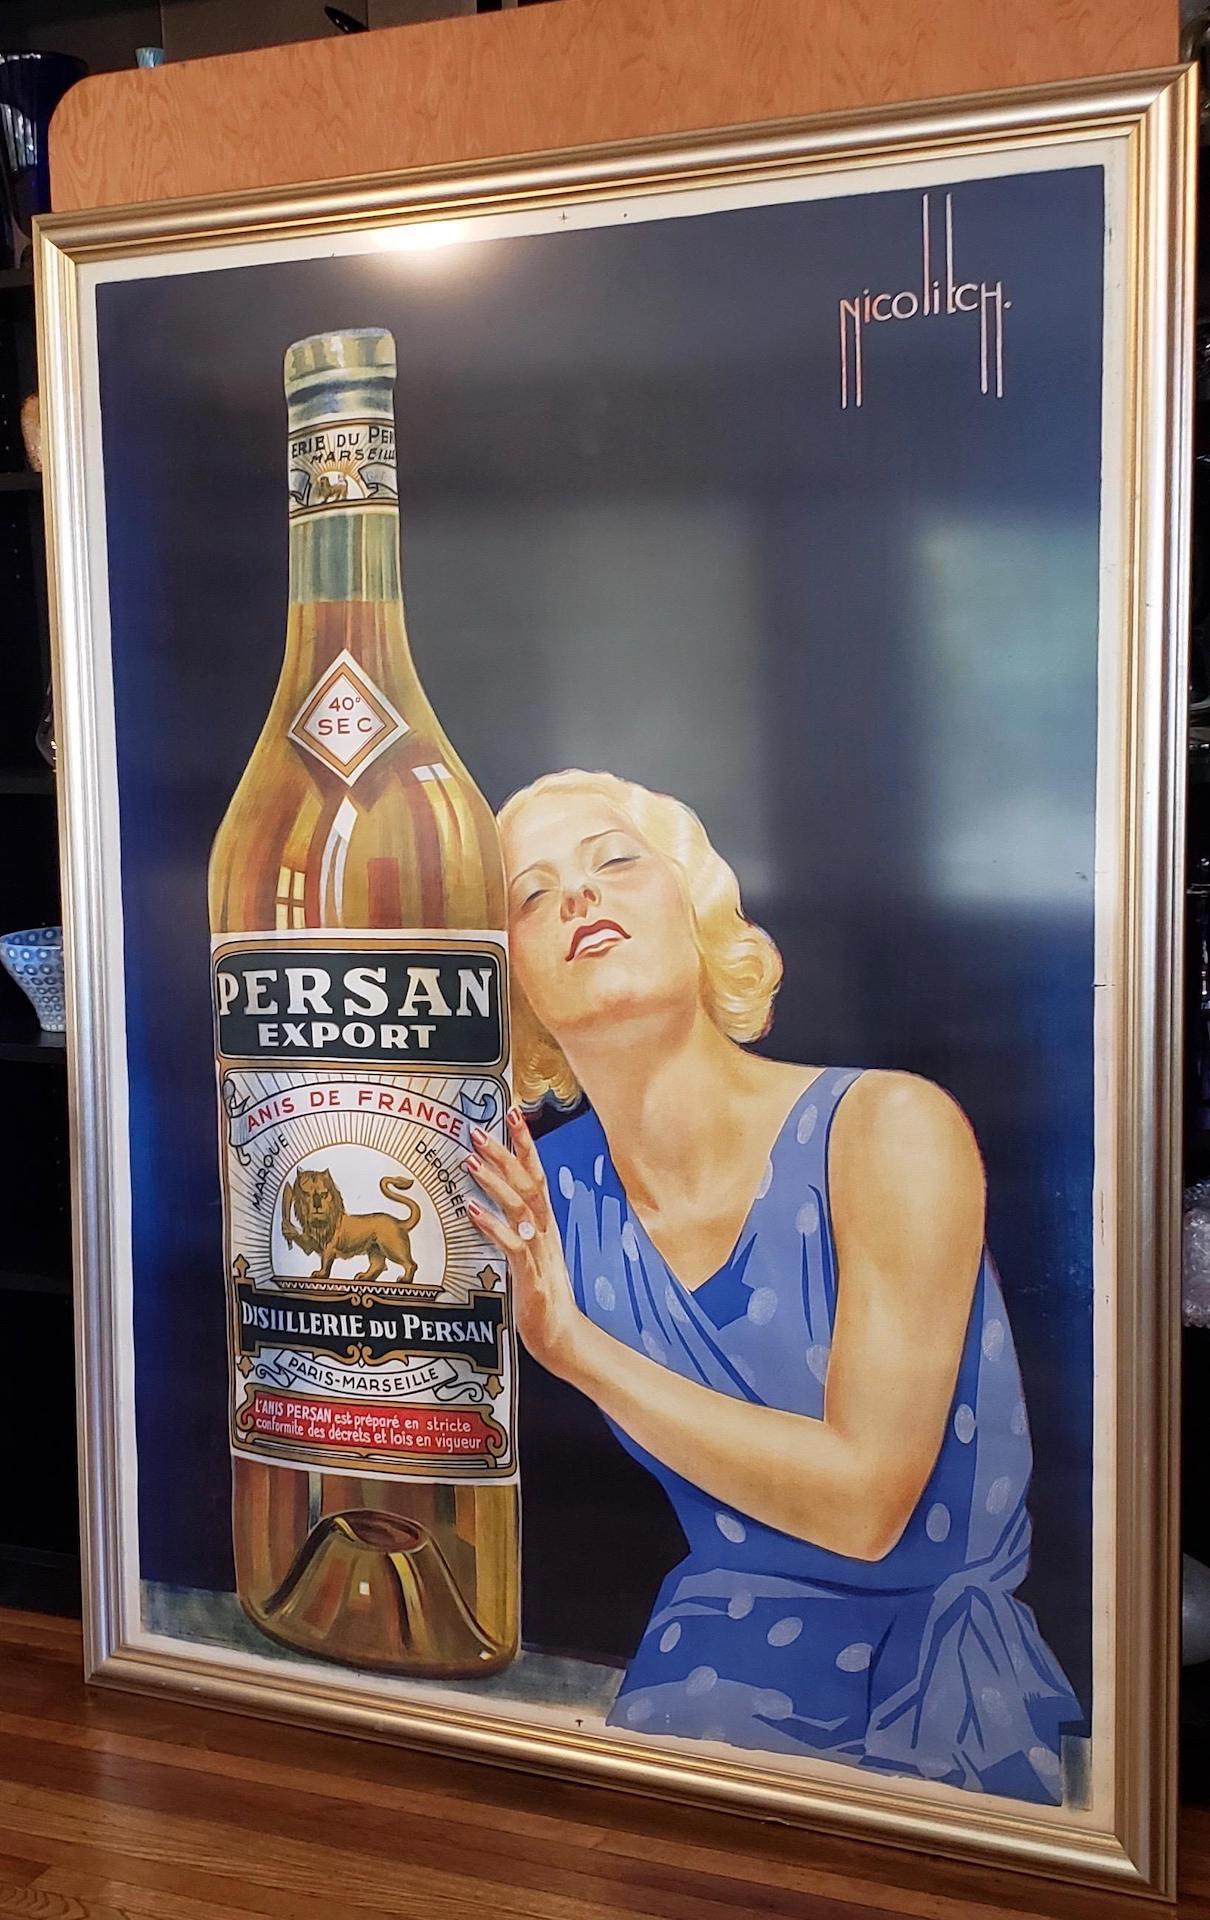 Obrad Nicolitch "Persan Export" Vintage French Deco Advertising Poster c.1928